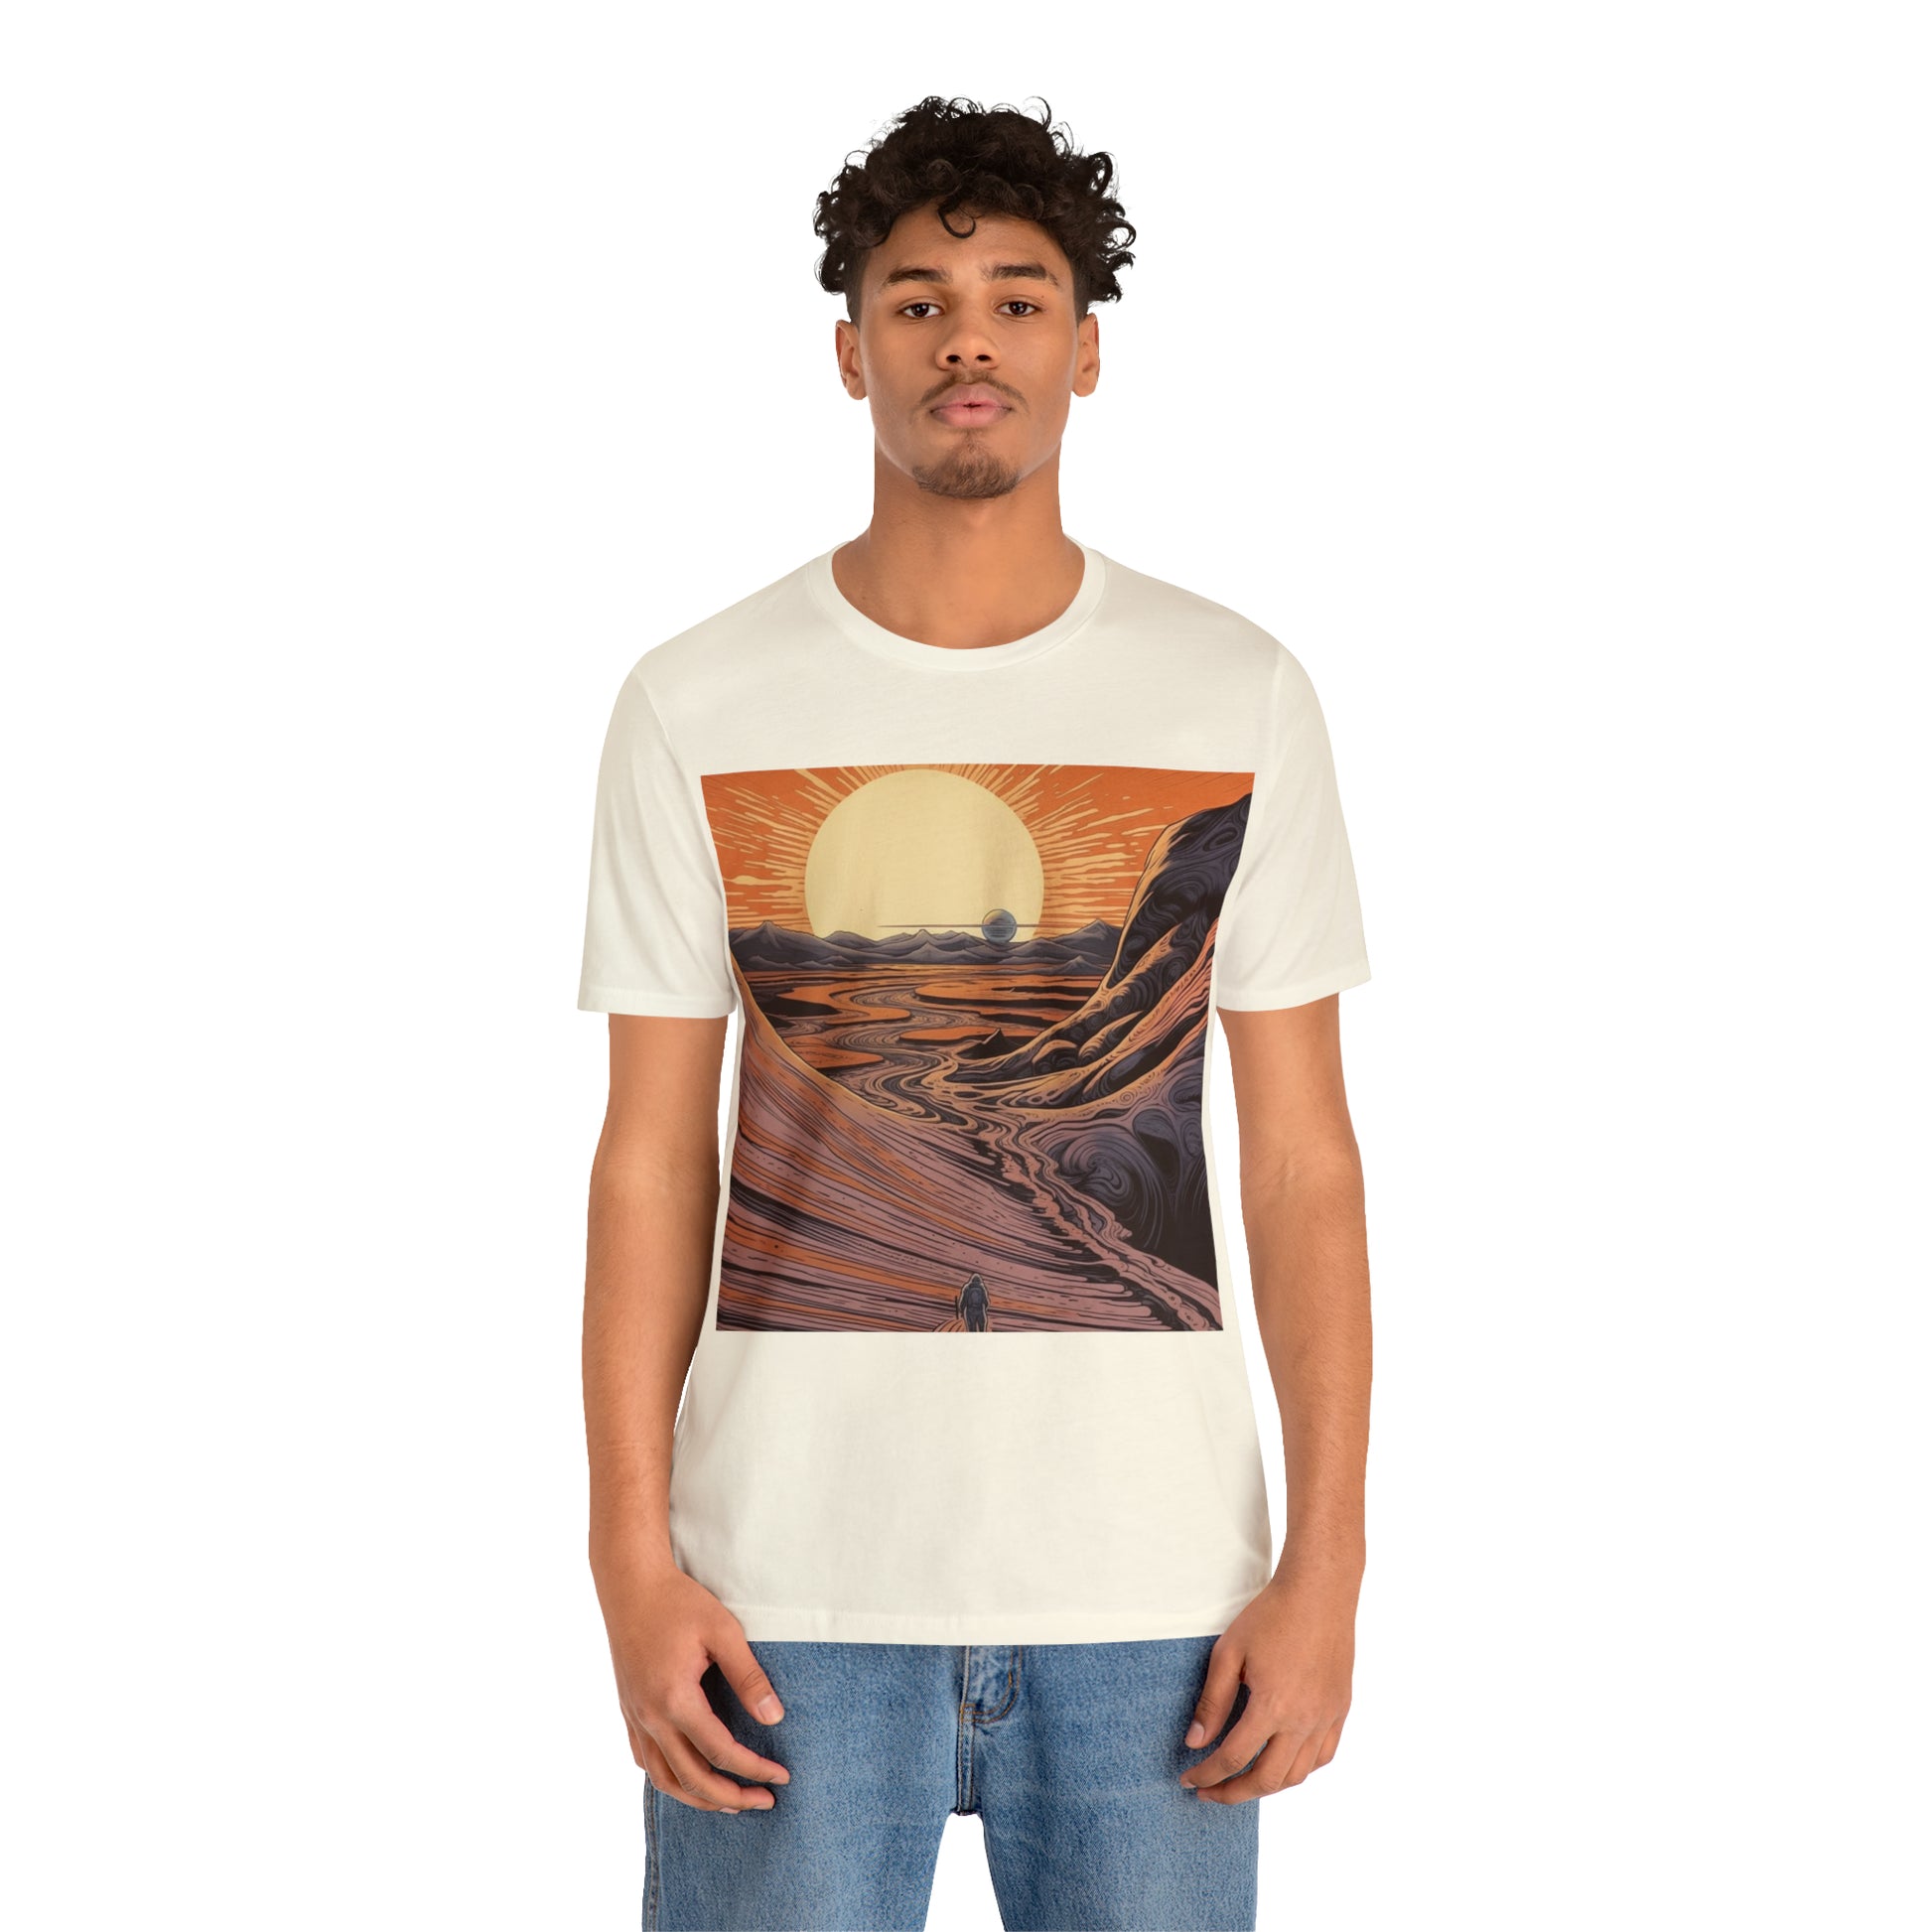 natural-quest-thread-tee-shirt-with-large-sunrise-over-dunes-on-center-of-shirt